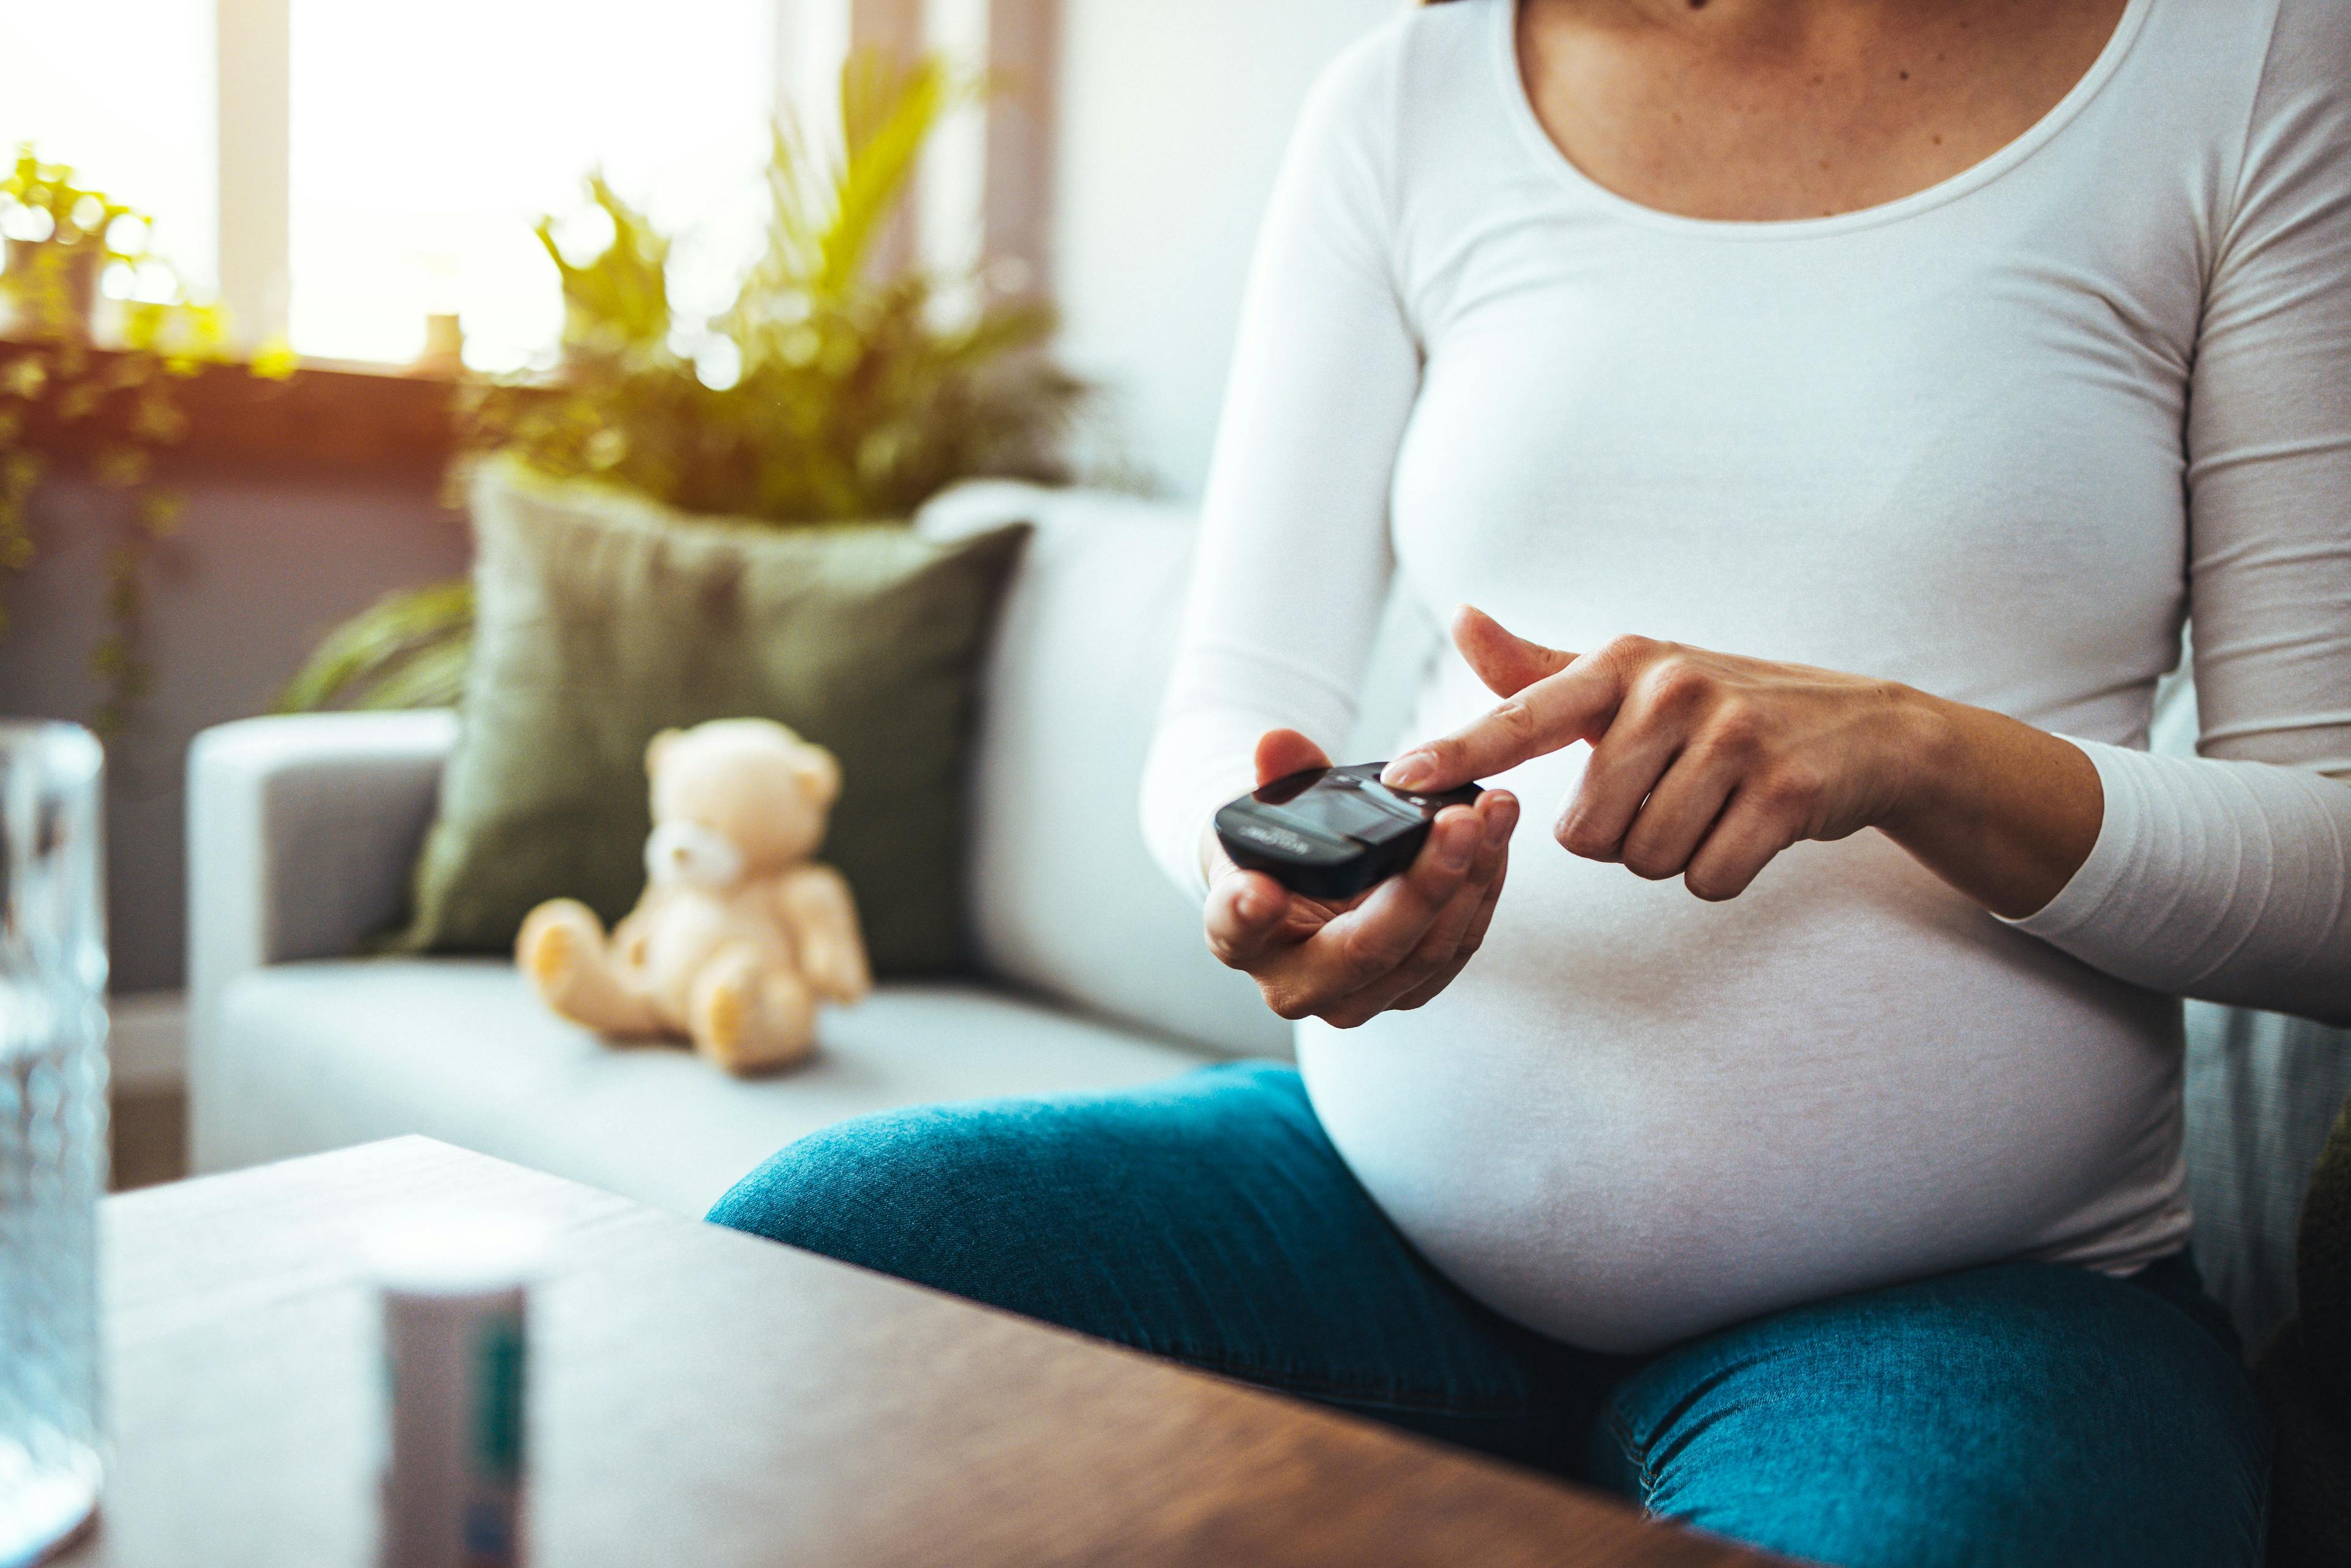 In gestational diabetes, tighter glycemic targets could influence outcomes for mother and child